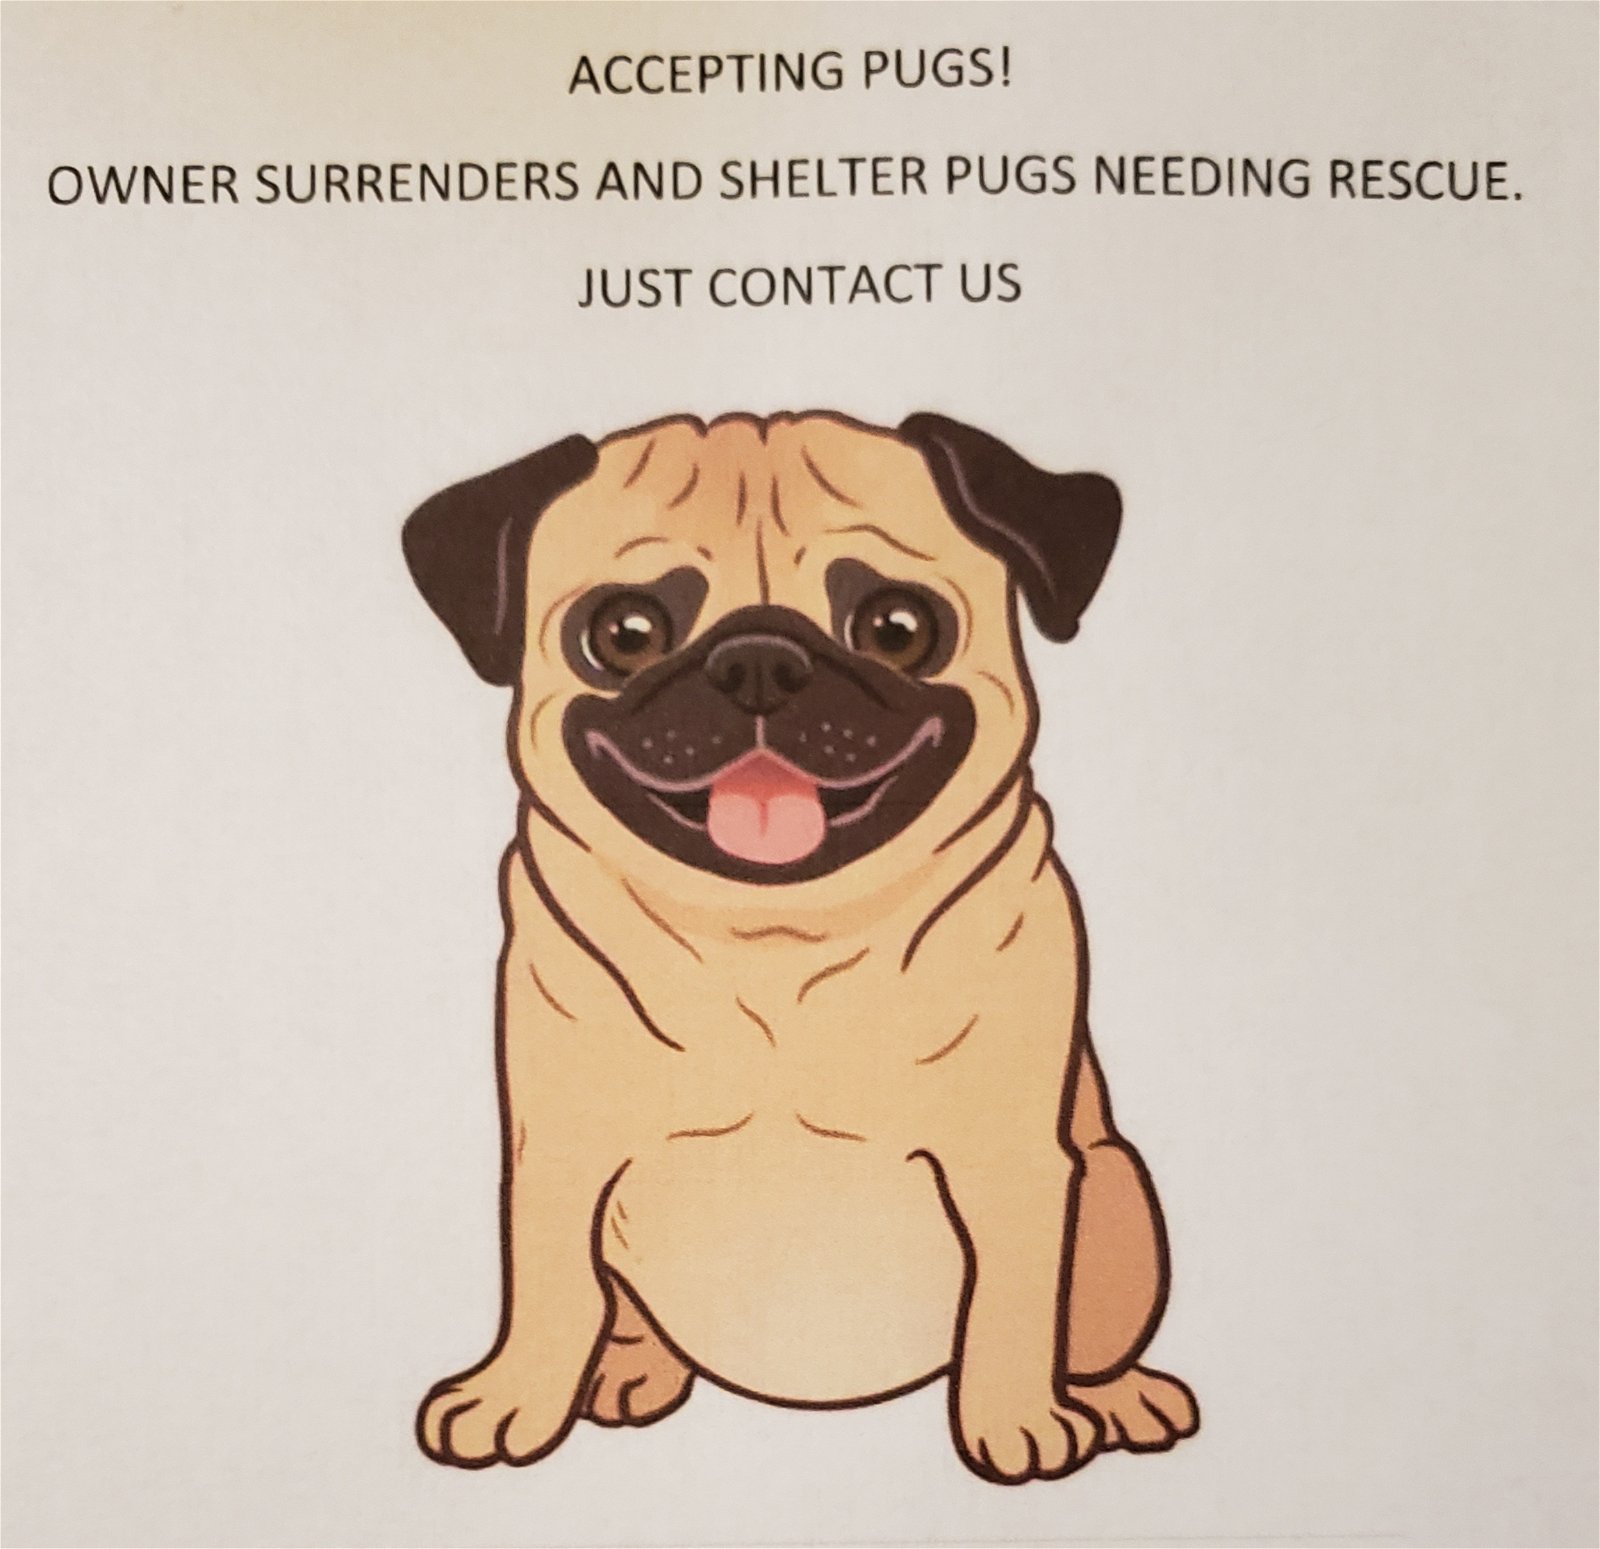 Accepting pugs into foster care